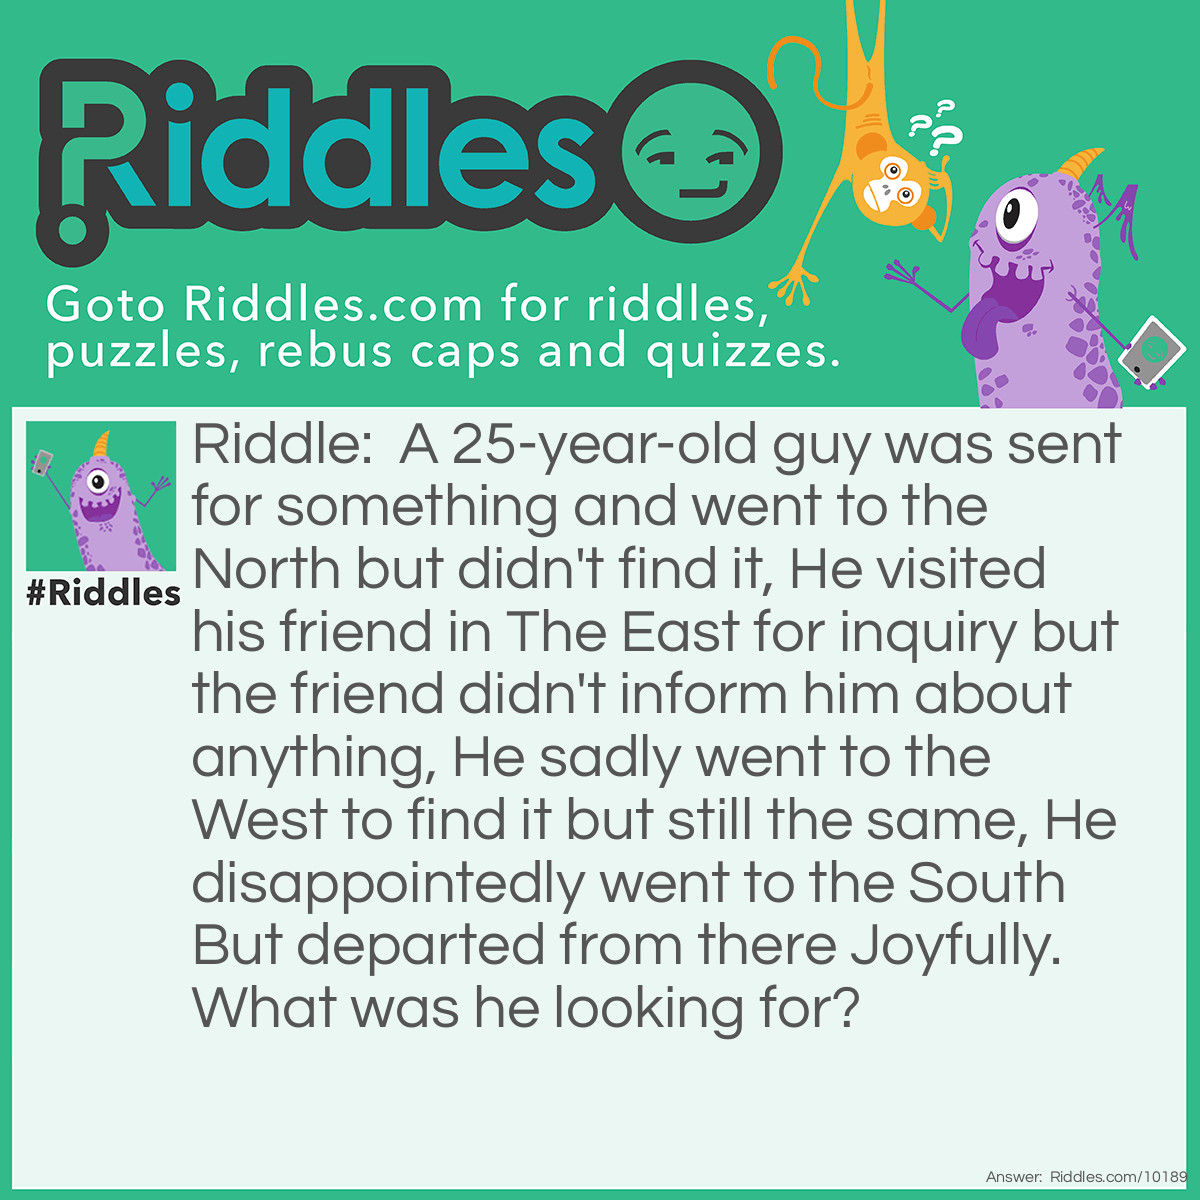 Riddle: A 25-year-old guy was sent for something and went to the North but didn't find it, He visited his friend in The East for inquiry but the friend didn't inform him about anything, He sadly went to the West to find it but still the same, He disappointedly went to the South But departed from there Joyfully. What was he looking for? Answer: News.